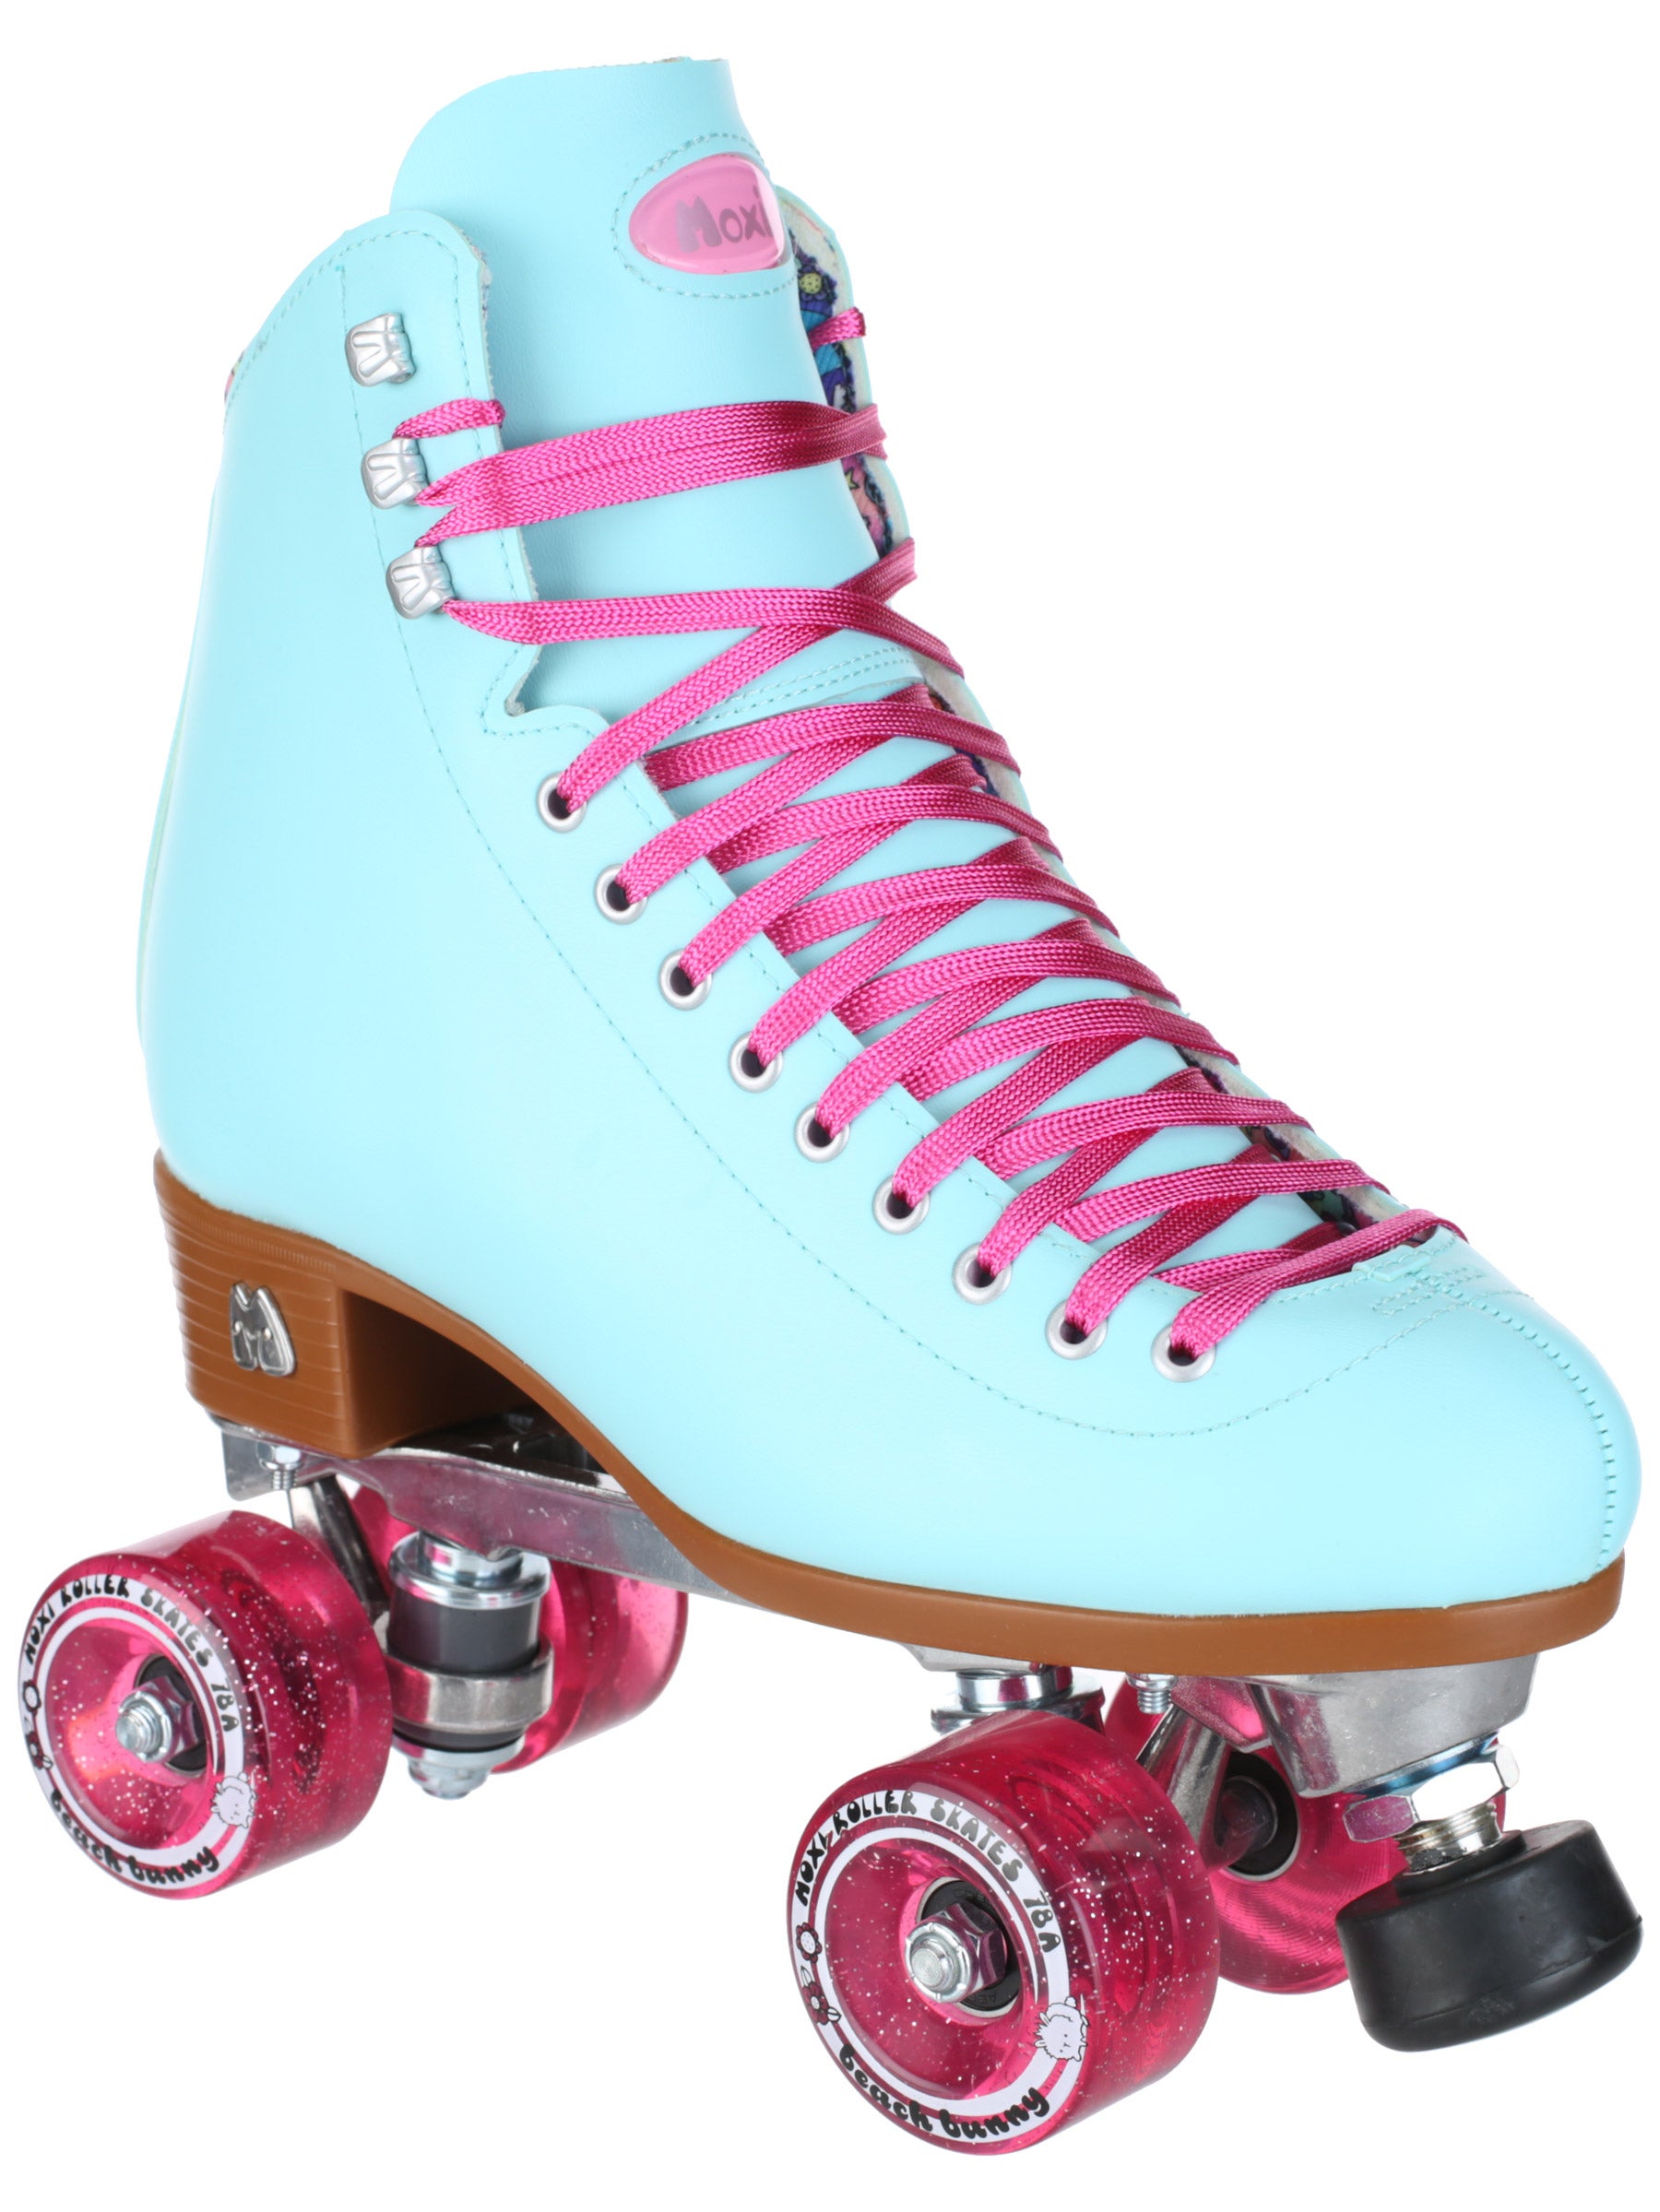 Details about   Moxi Beach Bunny Peach Roller Skates Size 7 w8-8.5 Brand New Fast Shipping 